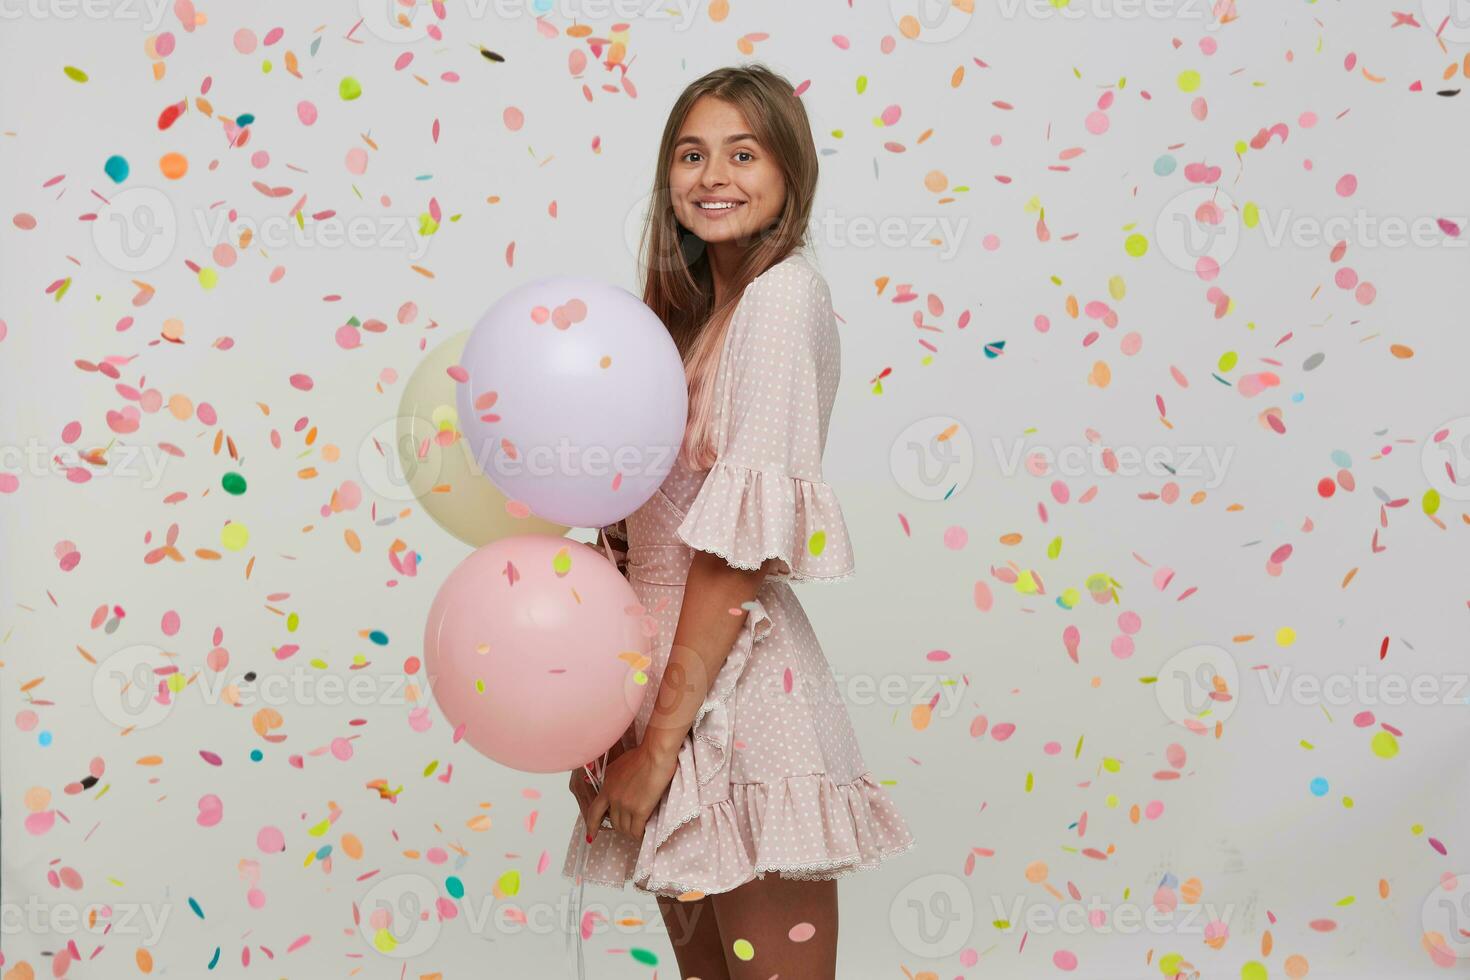 Portrait of happy attractive young woman with long dyed pastel pink hair wears polka dot pink dress holding colorful baloons in hand and having party isolated over white background with confetti photo